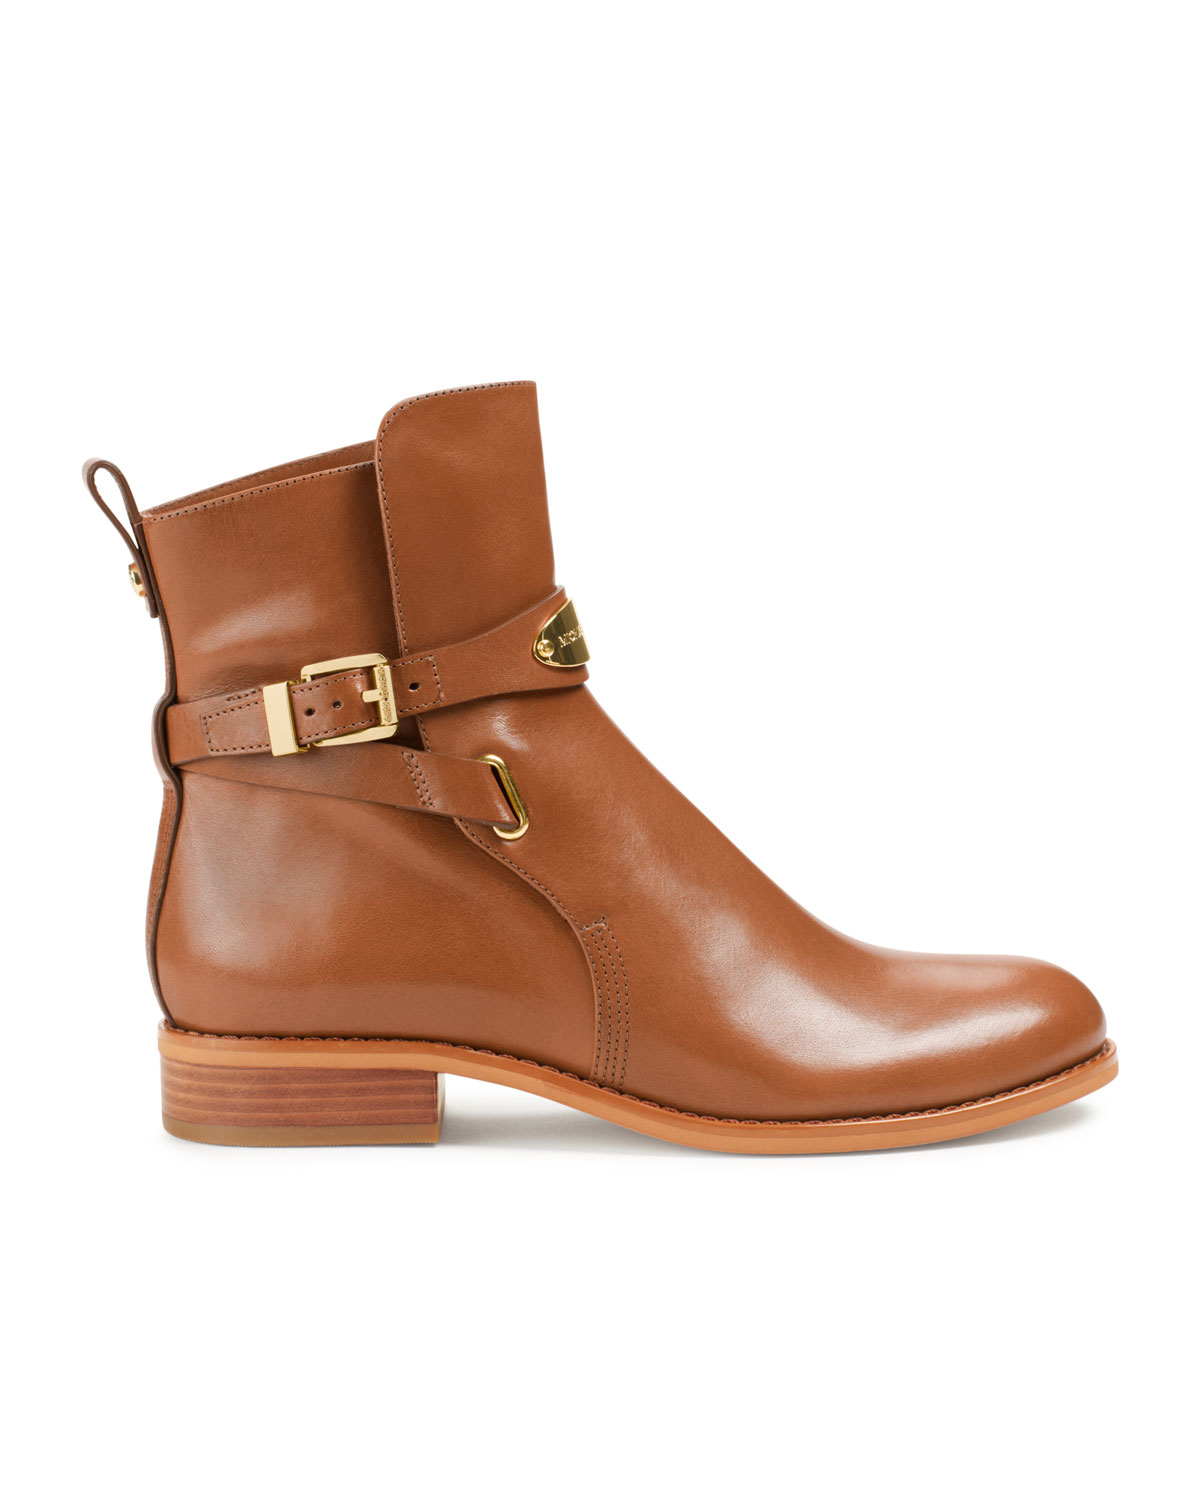 Michael Kors Arley Leather Ankle Boot in Brown - Lyst